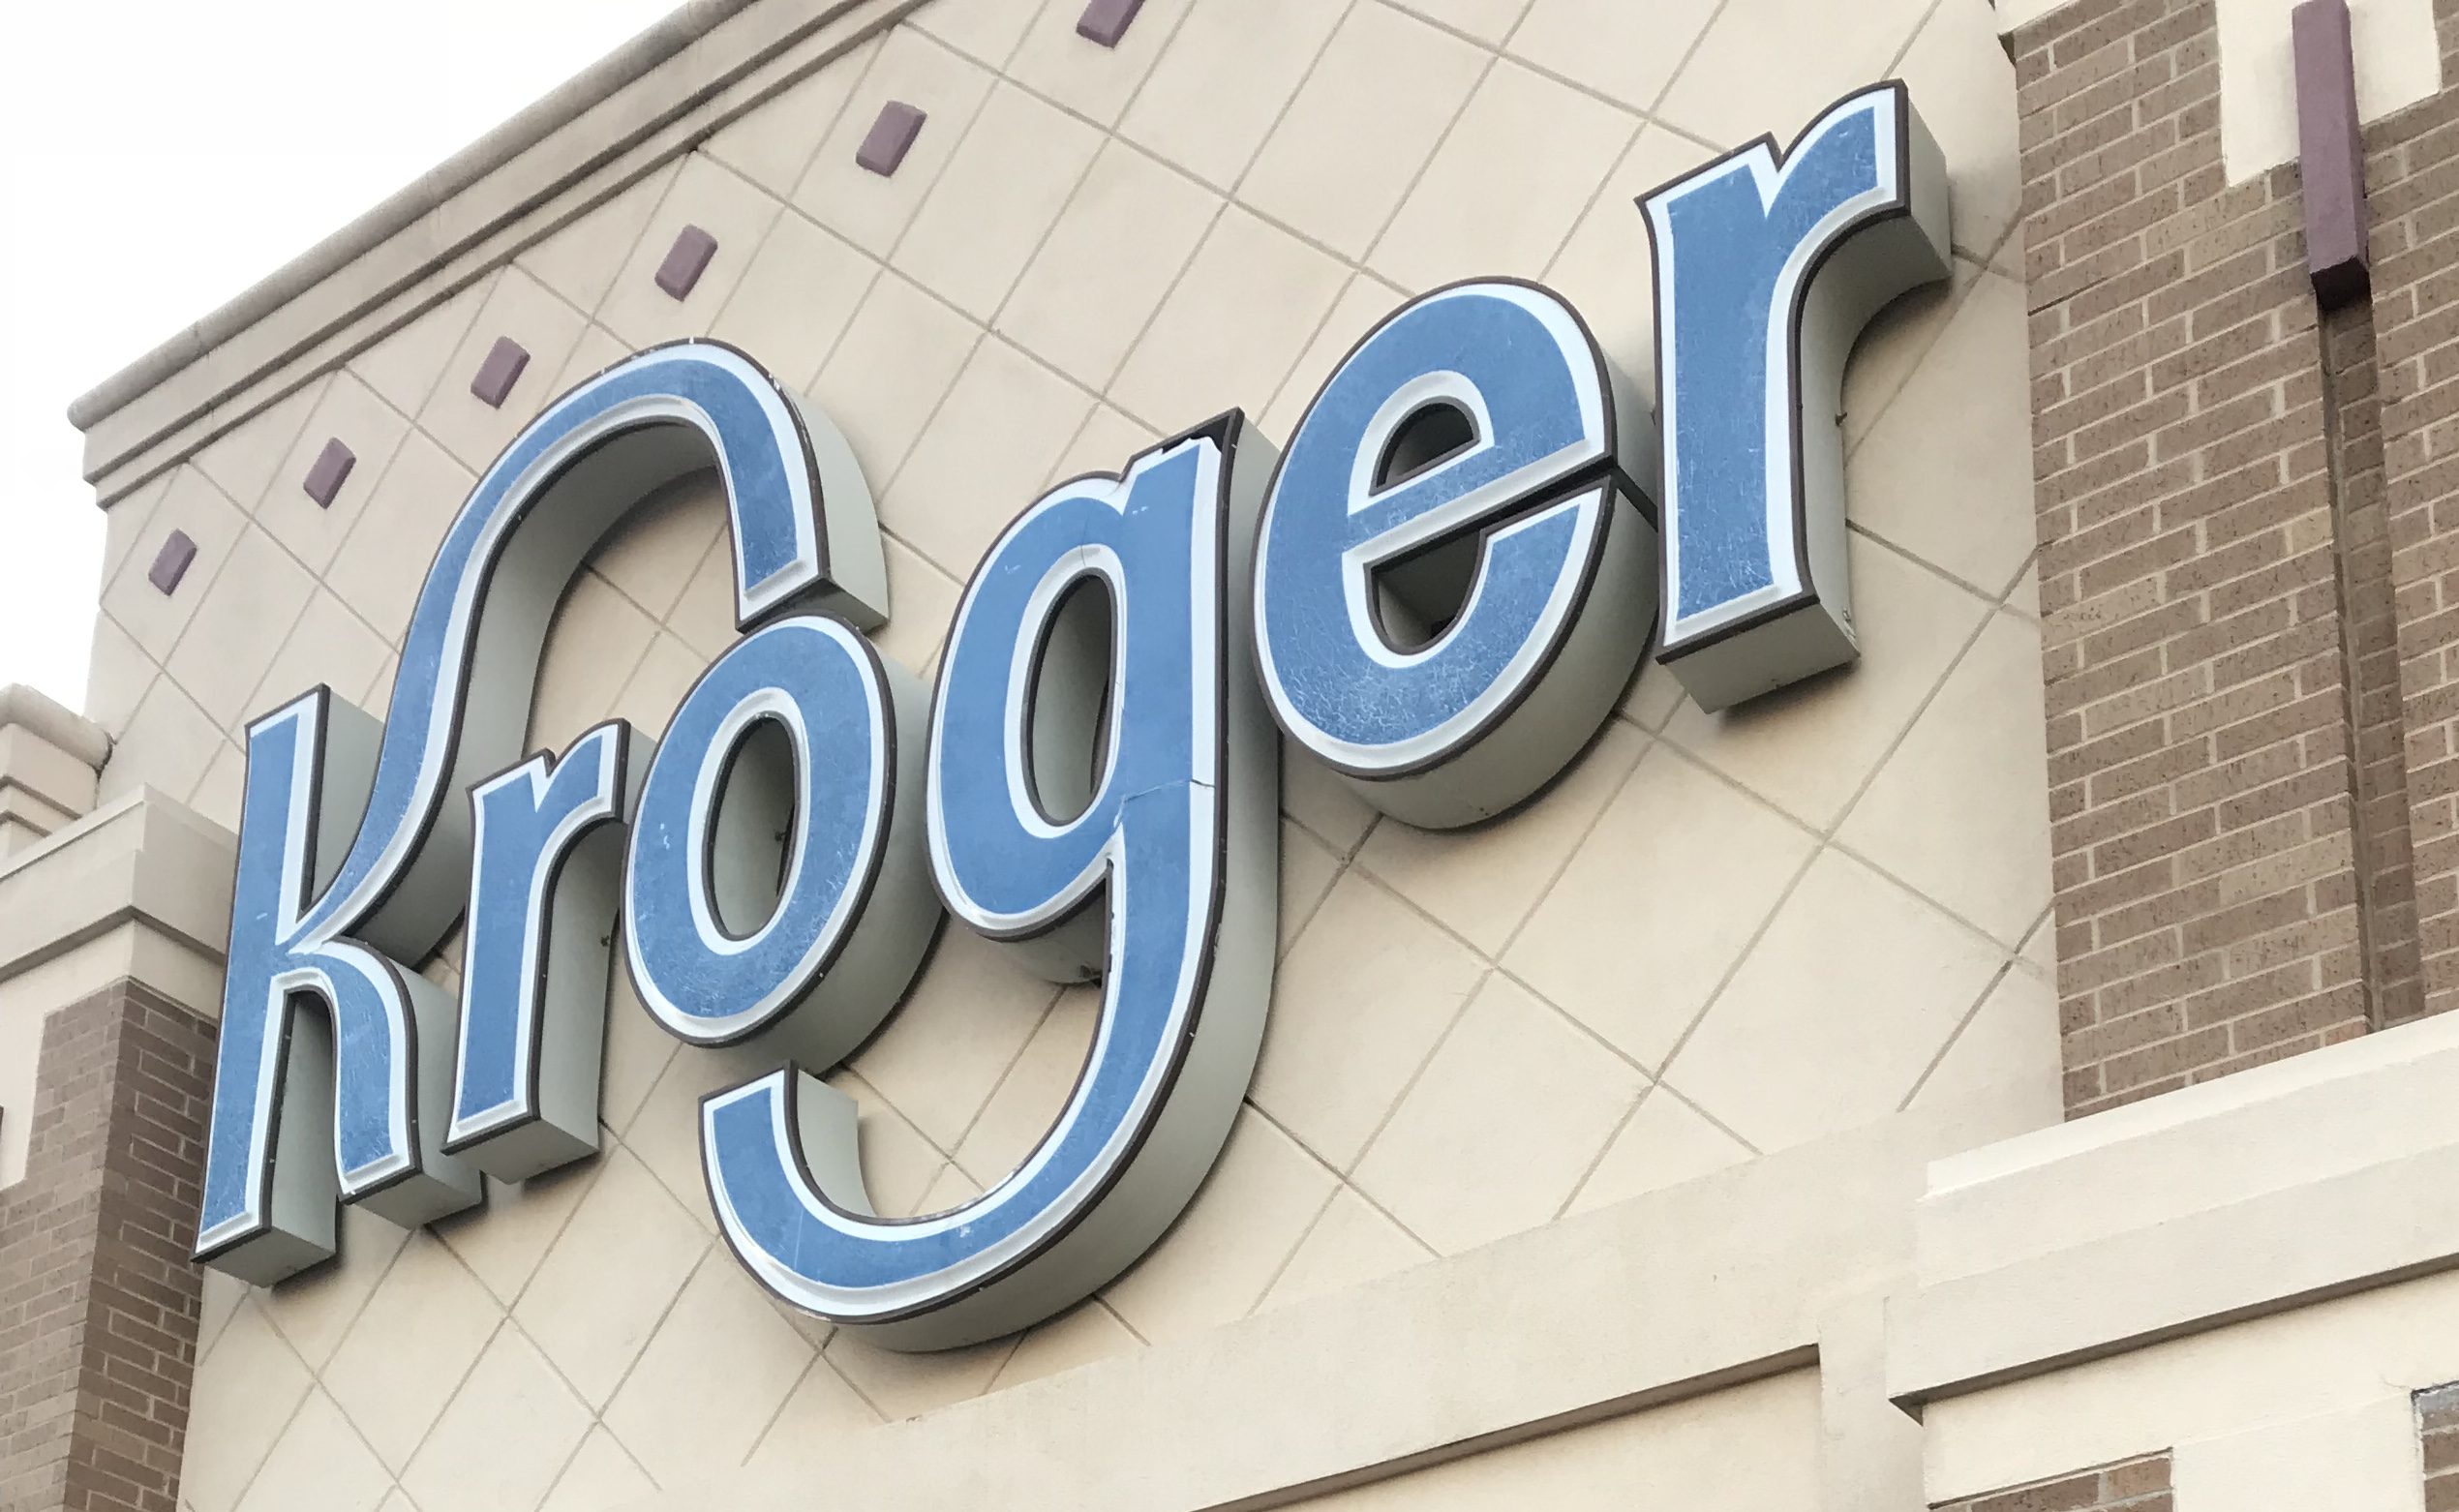 Speedway Kroger bakery closed after evidence of rodent activity